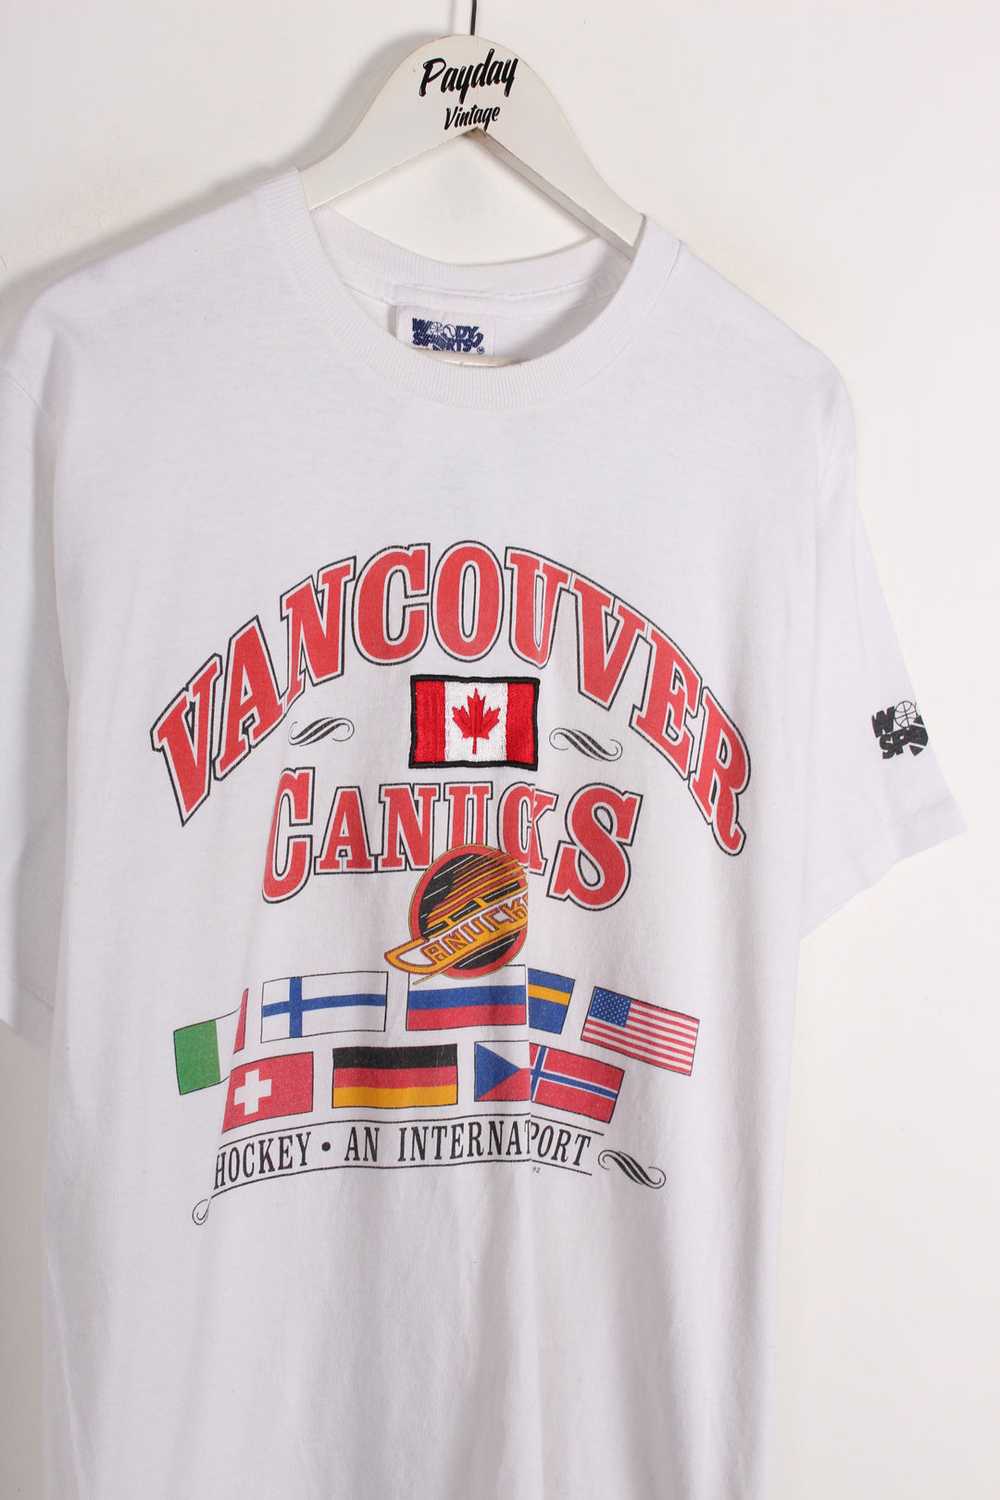 90's Vancouver Graphic T-Shirt Large - image 2